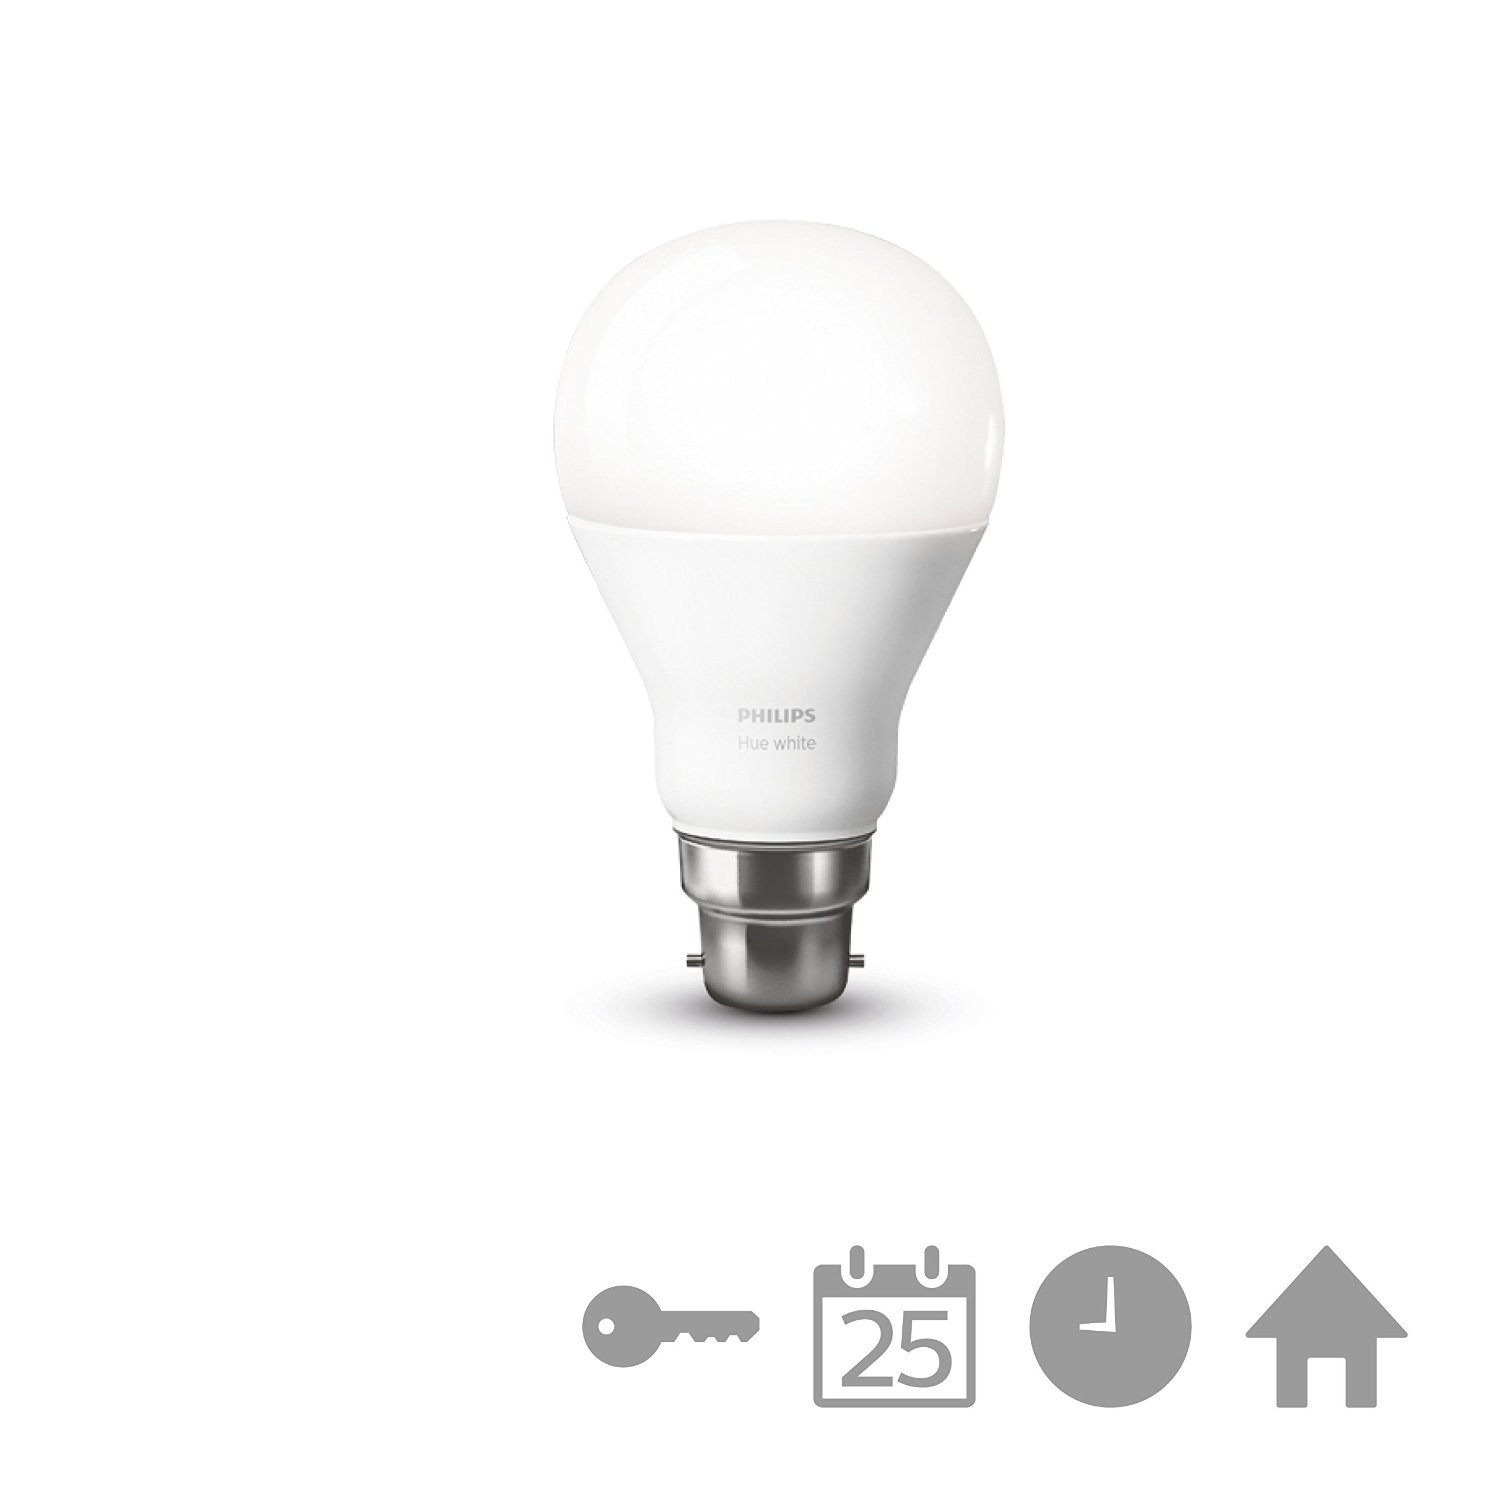 Best ideas about Philips Hue Lighting
. Save or Pin Philips Hue White Personal Wireless Lighting LED B22 Light Now.